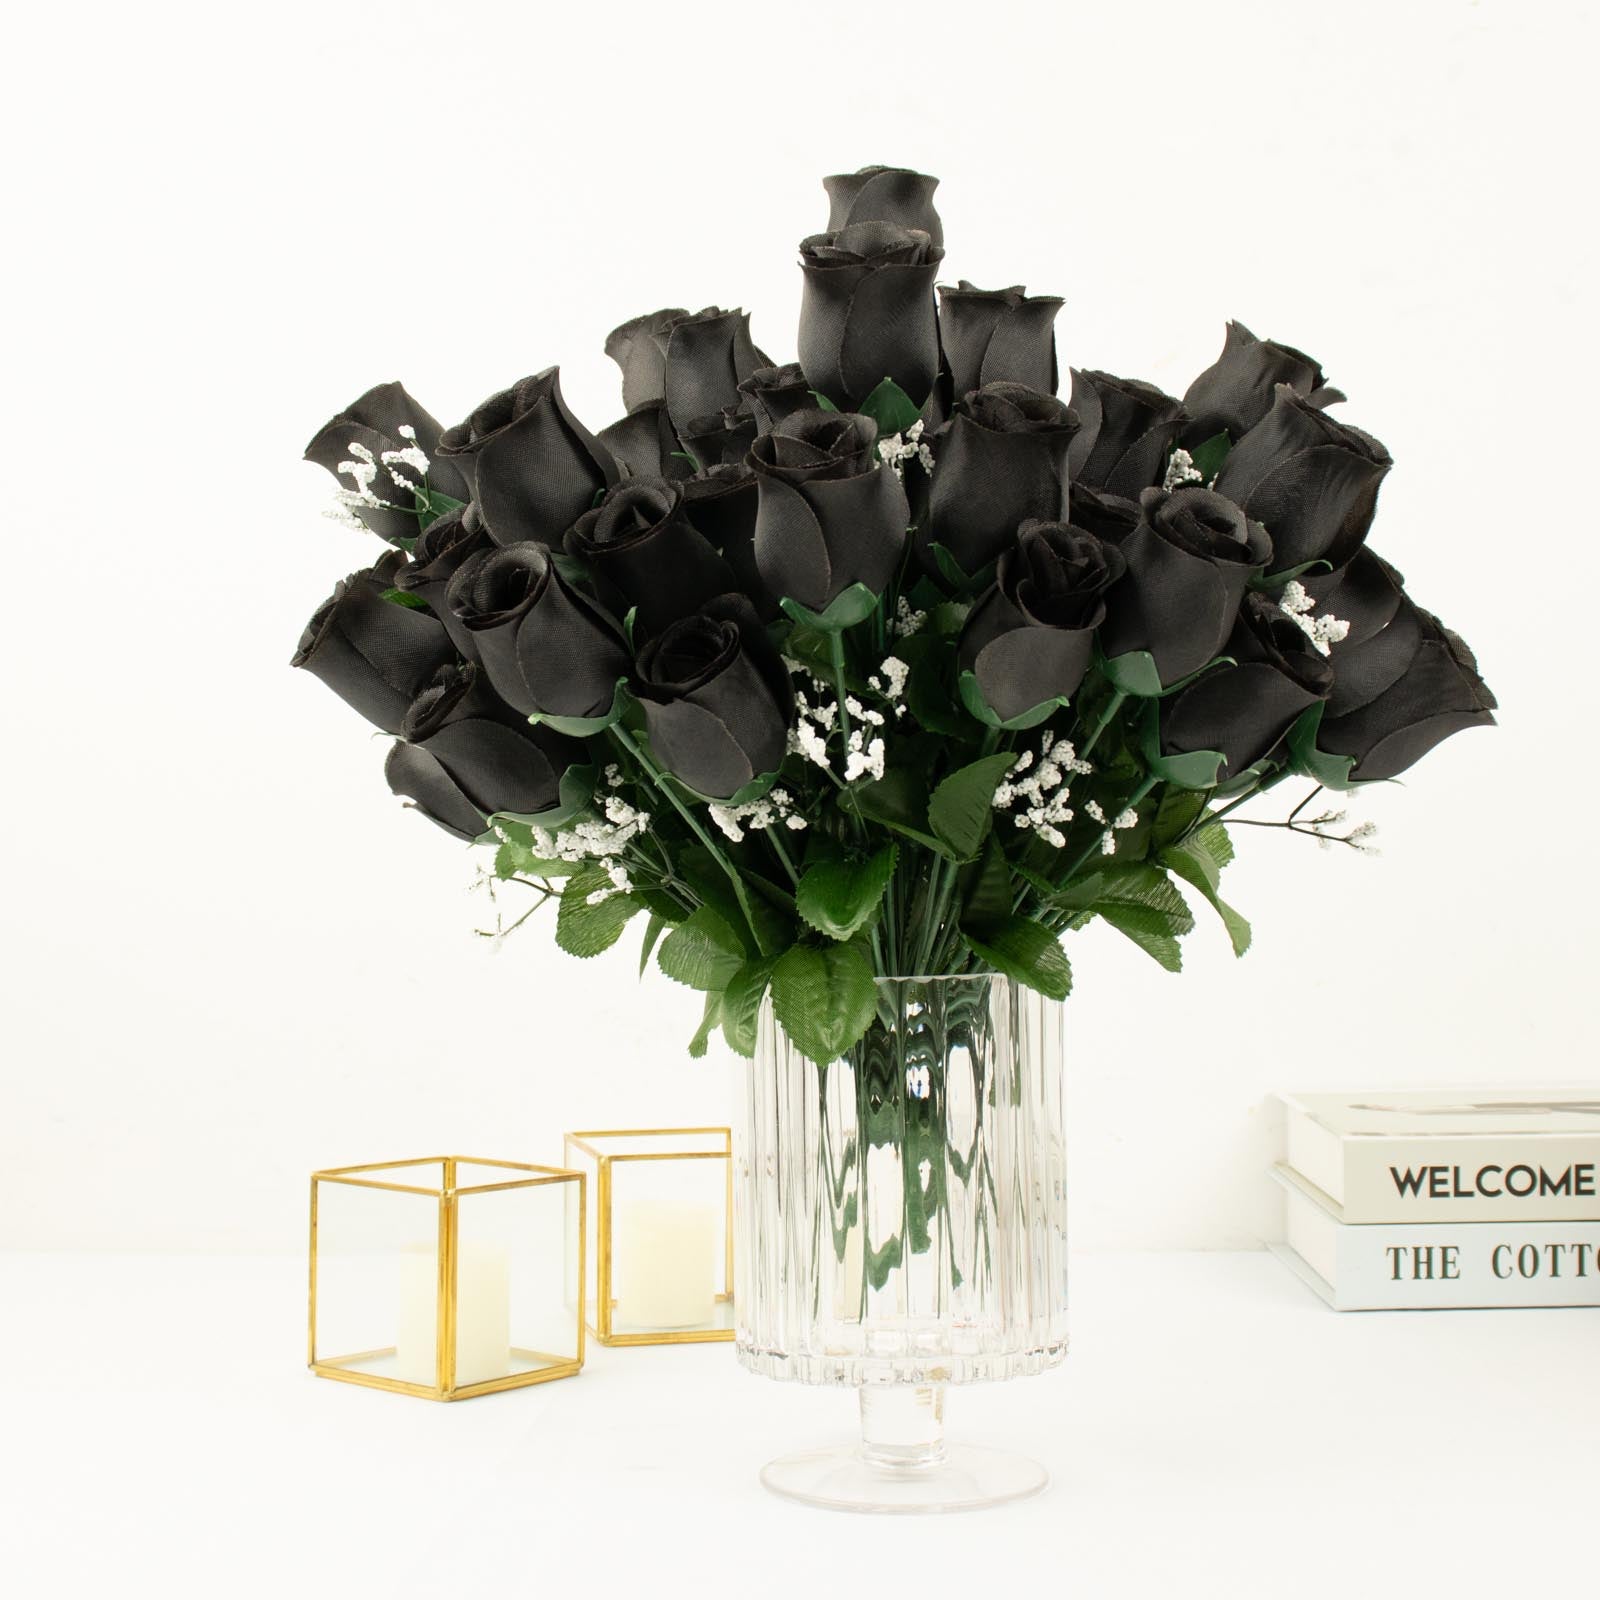 12 Bush Black 84 Rose Buds Real Touch Artificial Silk Flowers | eFavorMart